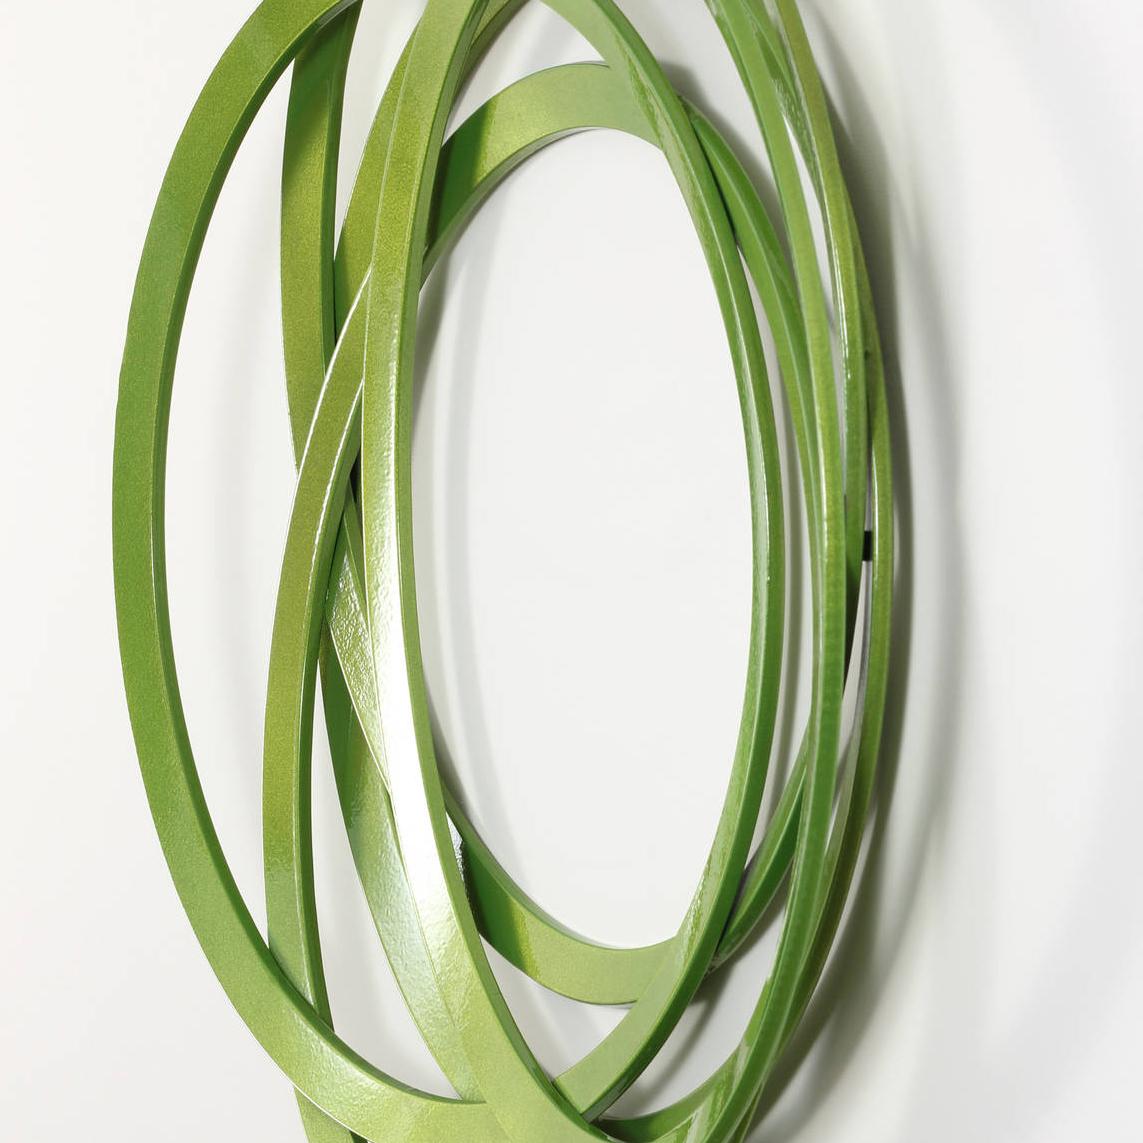 Erratic Colour Granny Smith - geometric abstract, circles, steel, wall sculpture - Sculpture by Shayne Dark